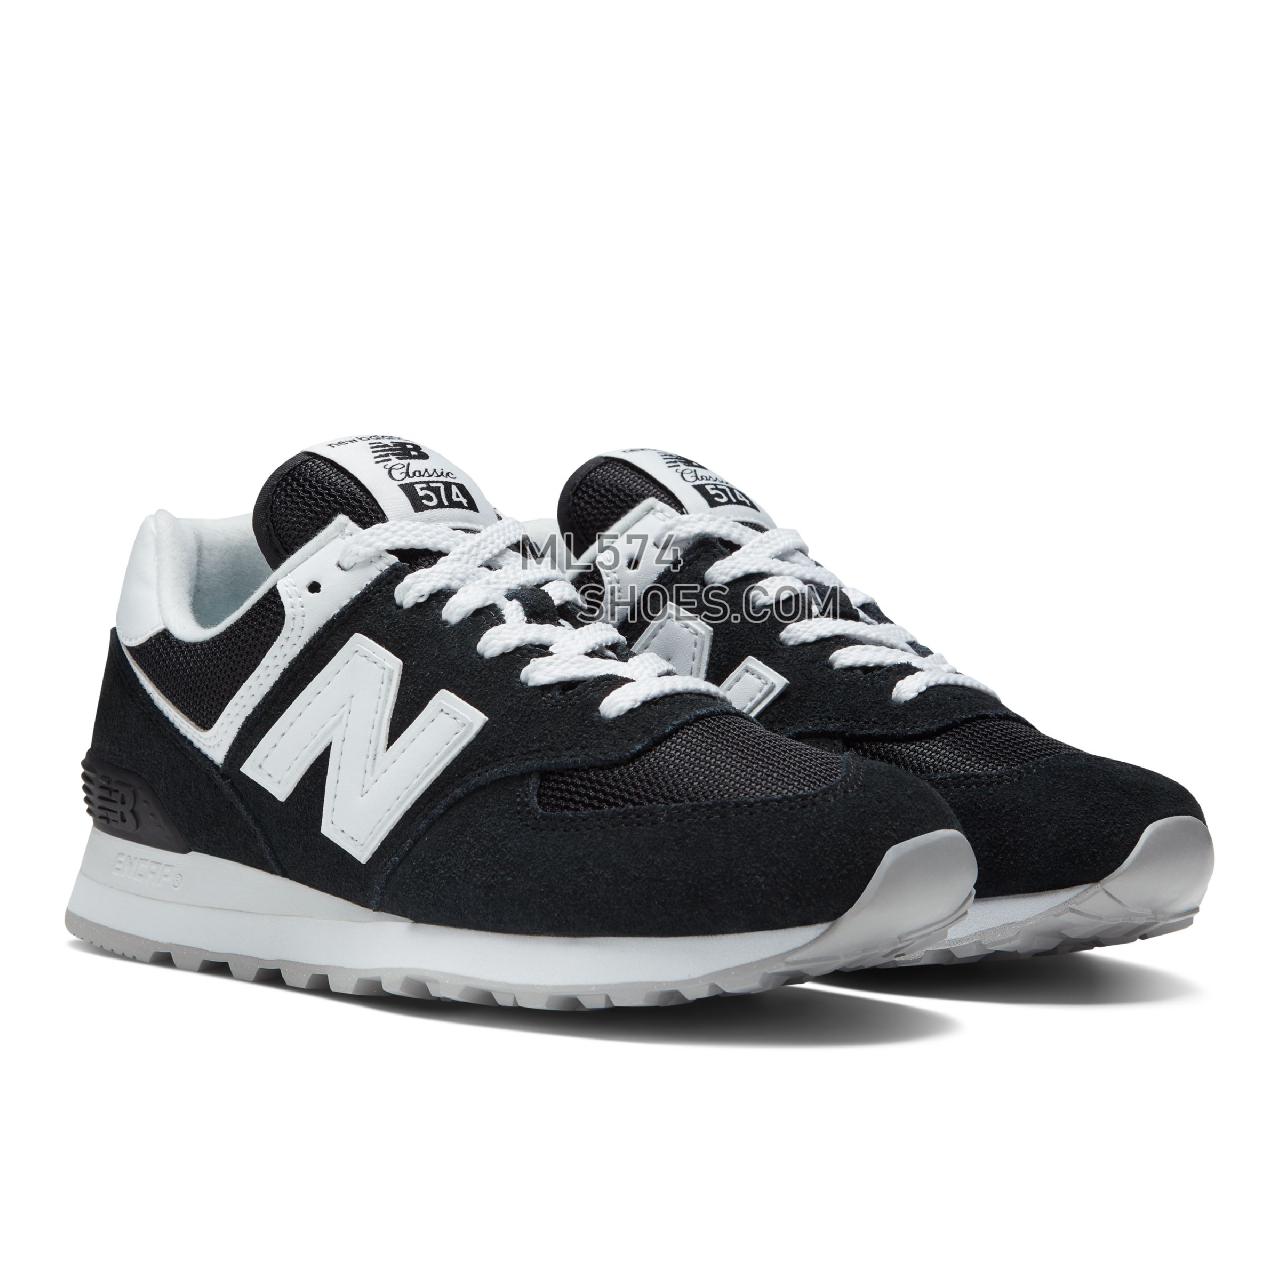 New Balance 574v2 - Women's Classic Sneakers - Black with White - WL574FQ2